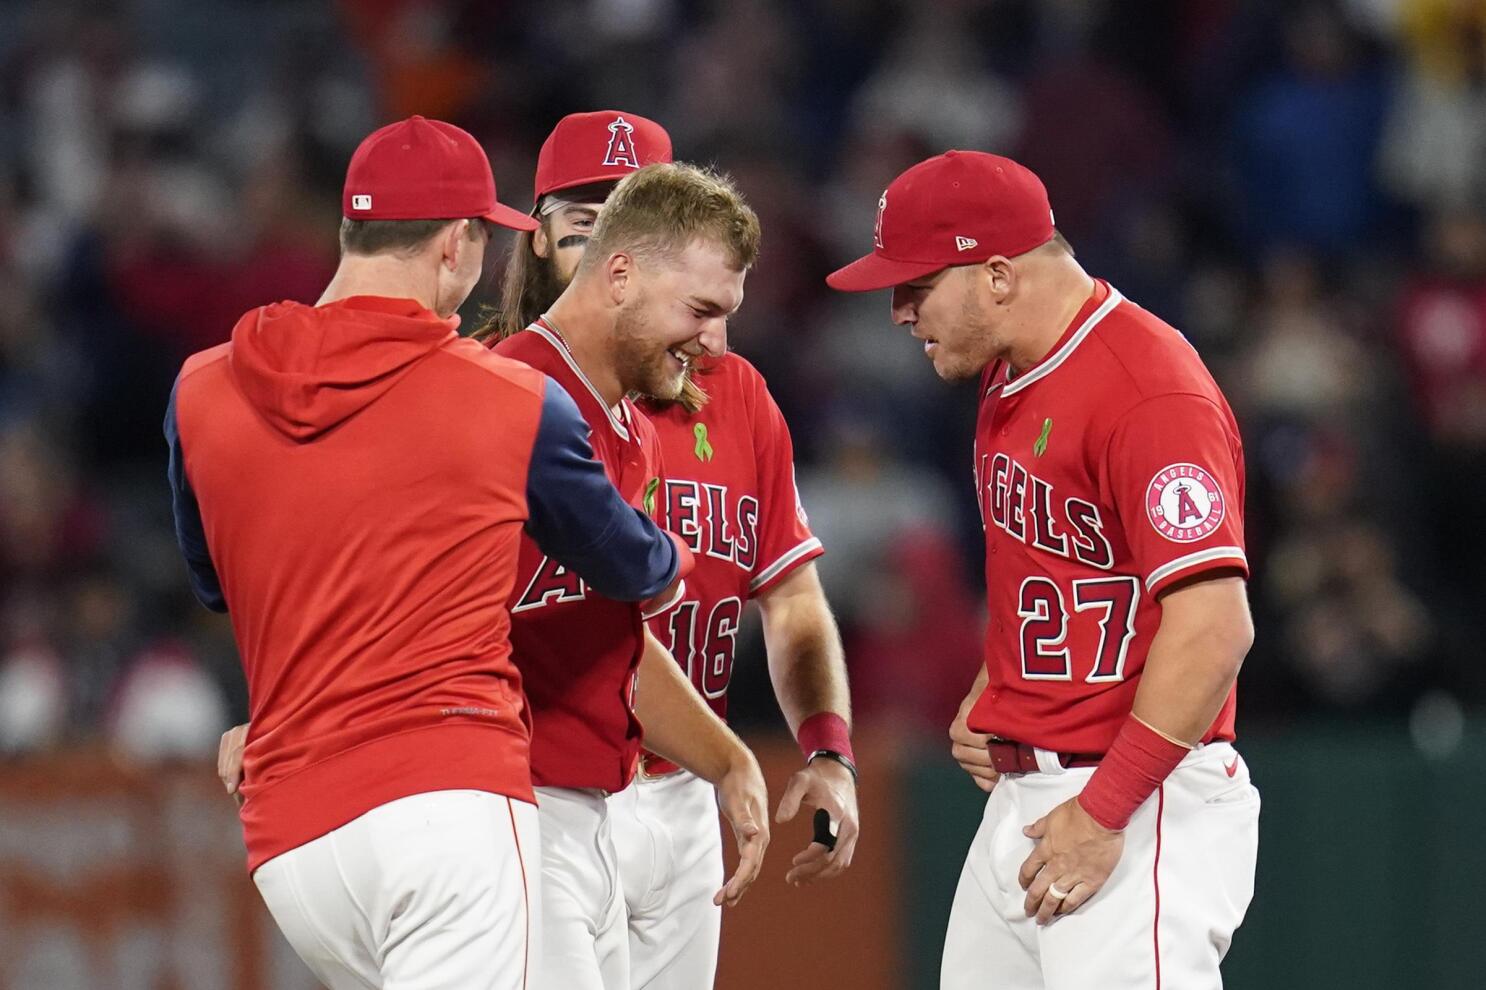 Los Angeles Angels Rookie Reid Detmers Throws Historic No-Hitter Against  The Rays - ESPN 98.1 FM - 850 AM WRUF